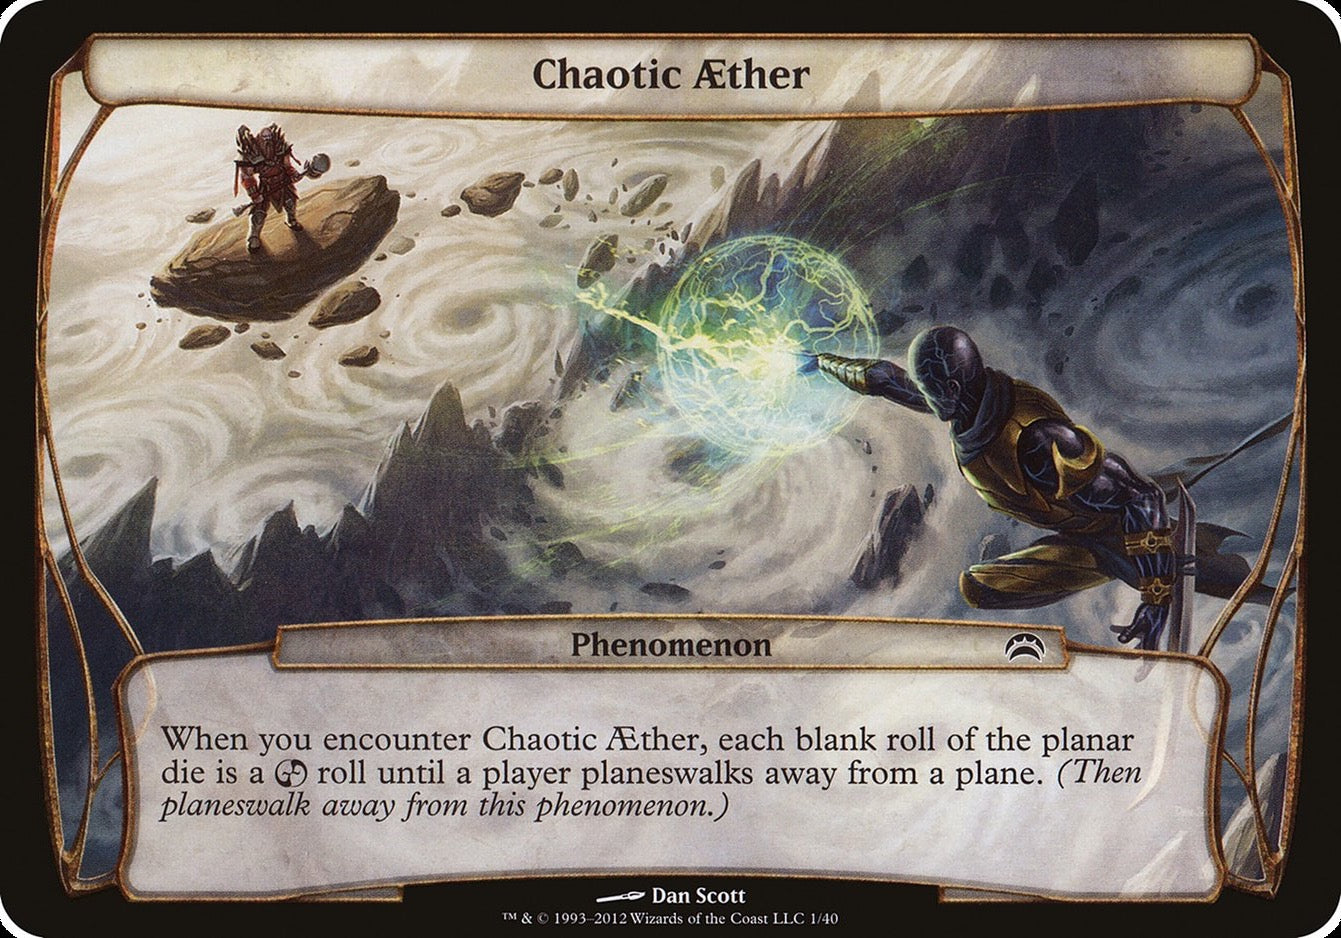 Éter Caótico / Chaotic Aether - Magic: The Gathering - MoxLand